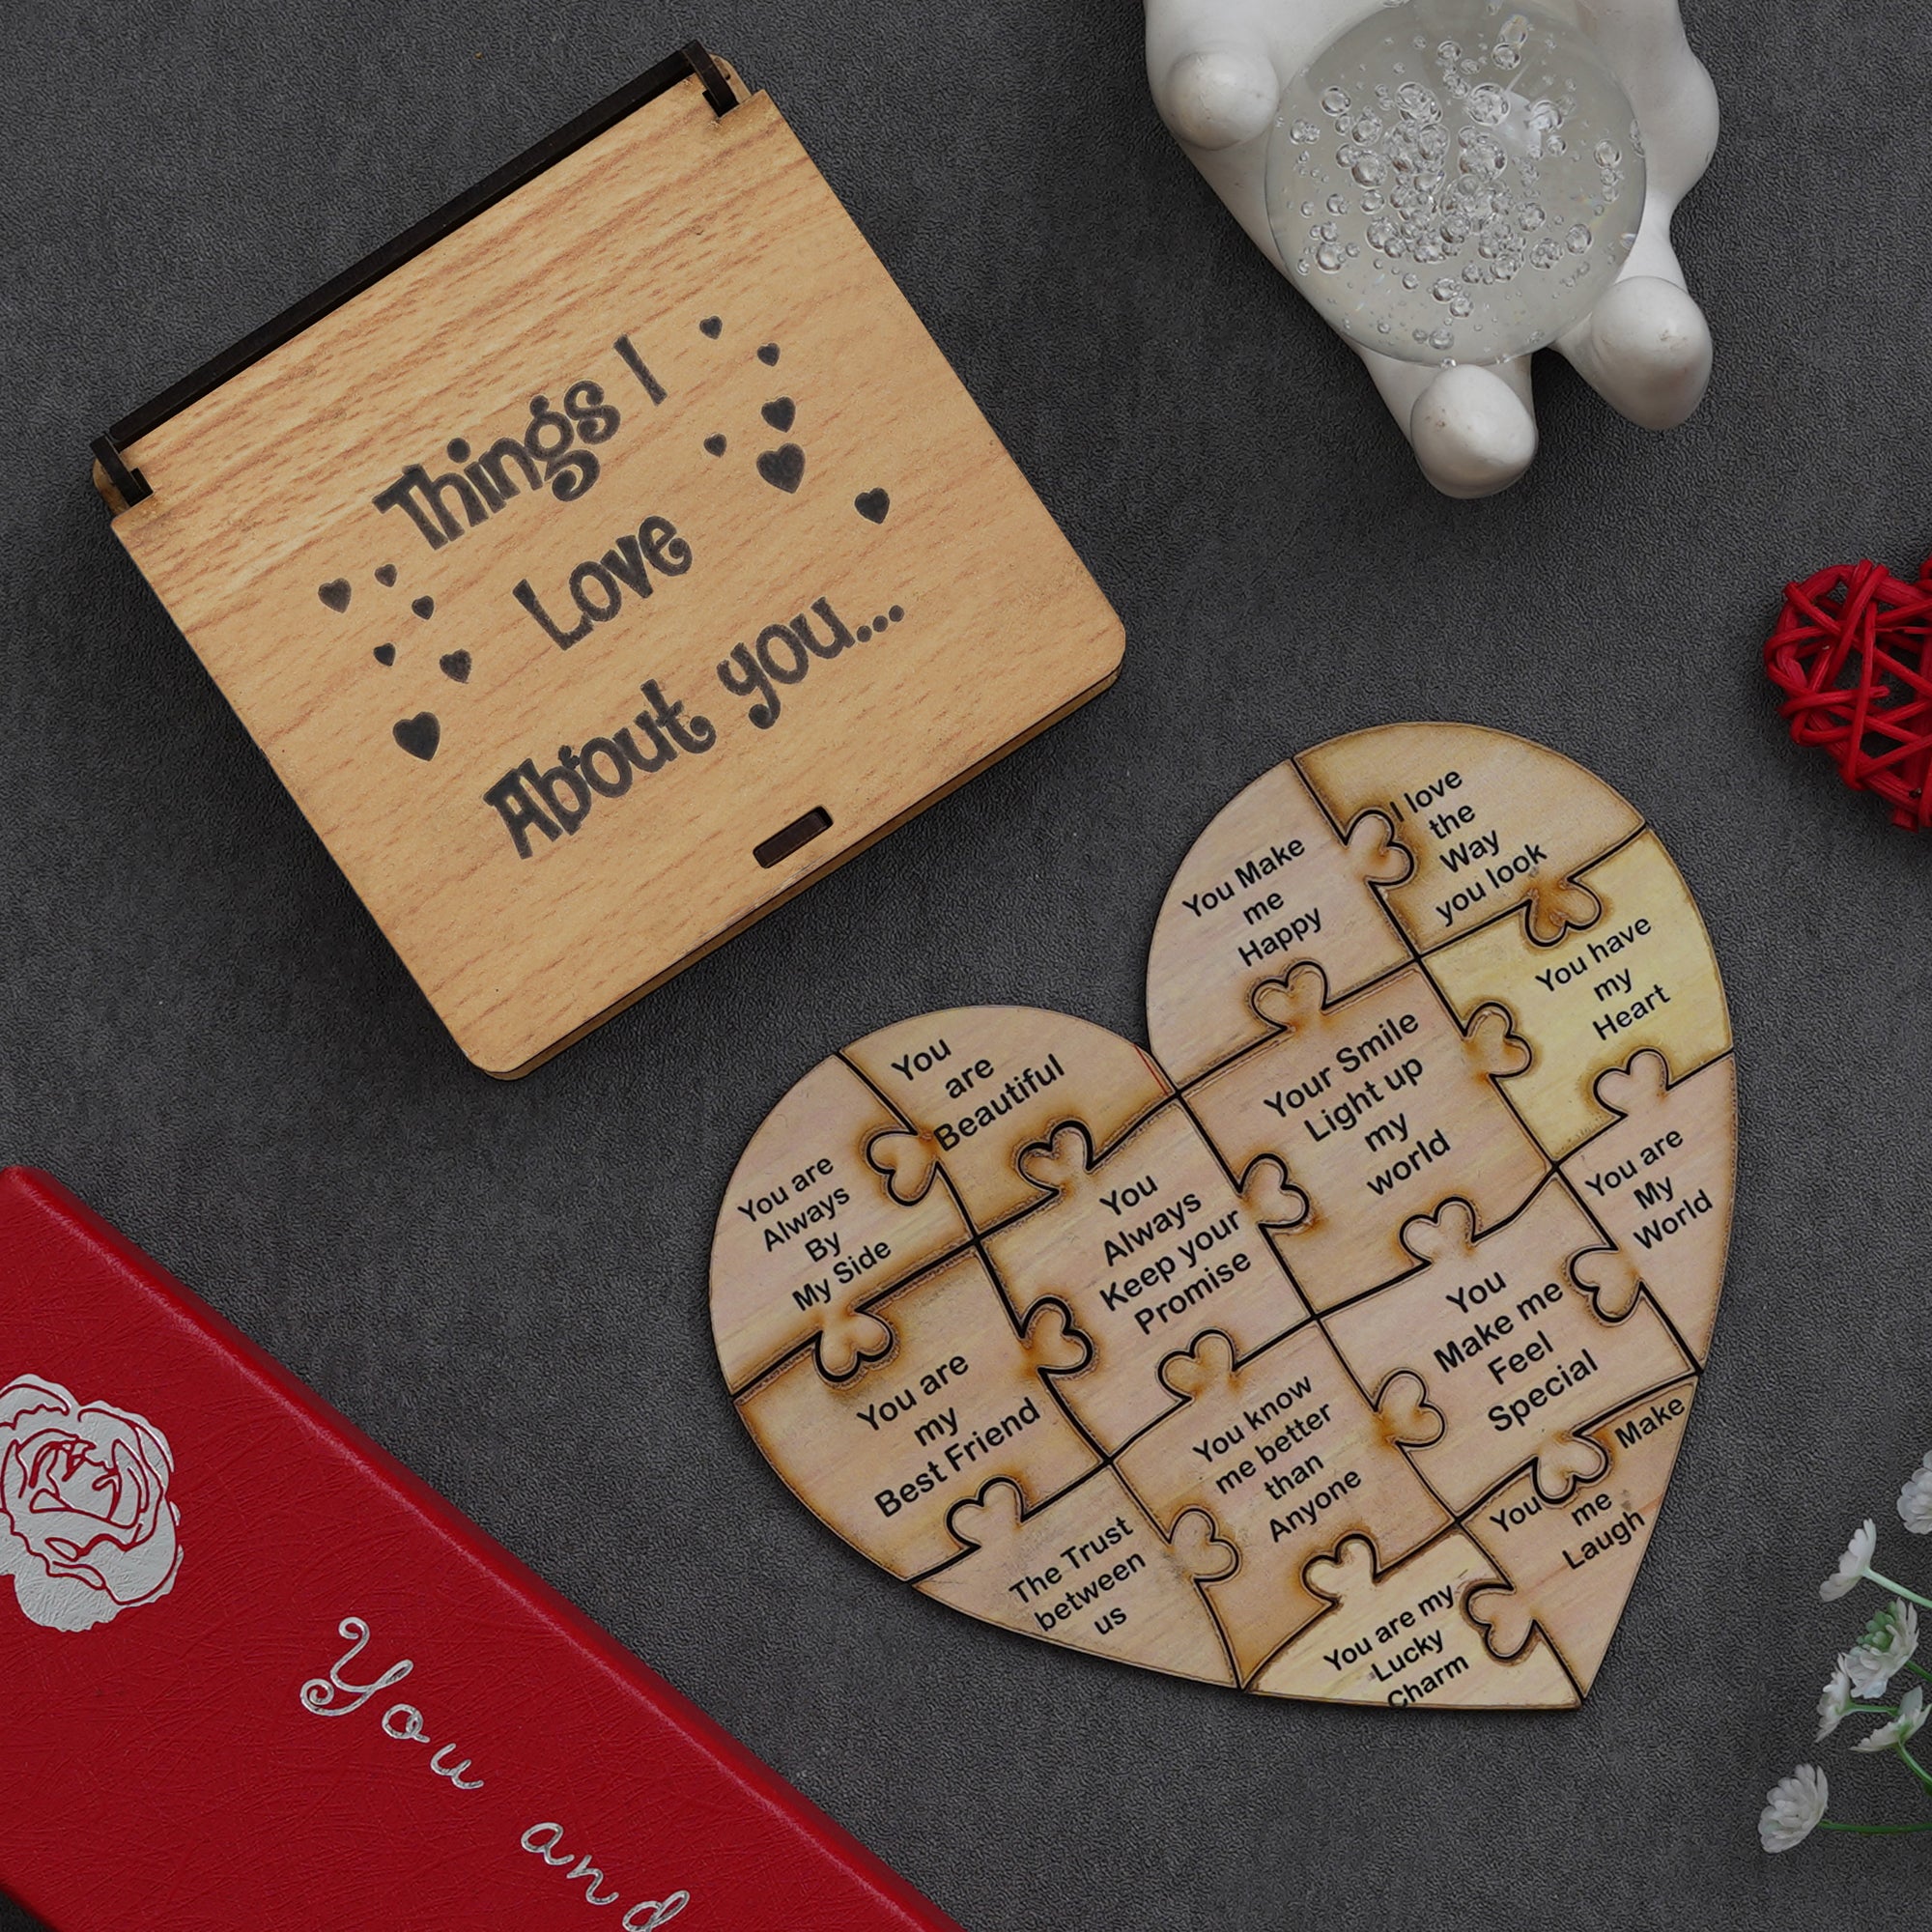 Valentine Combo of Set of 8 Love Post Cards Gift Cards Set, Red Gift Box with Teddy & Roses, "Things I Love About You" Puzzle Wooden Gift Set 5